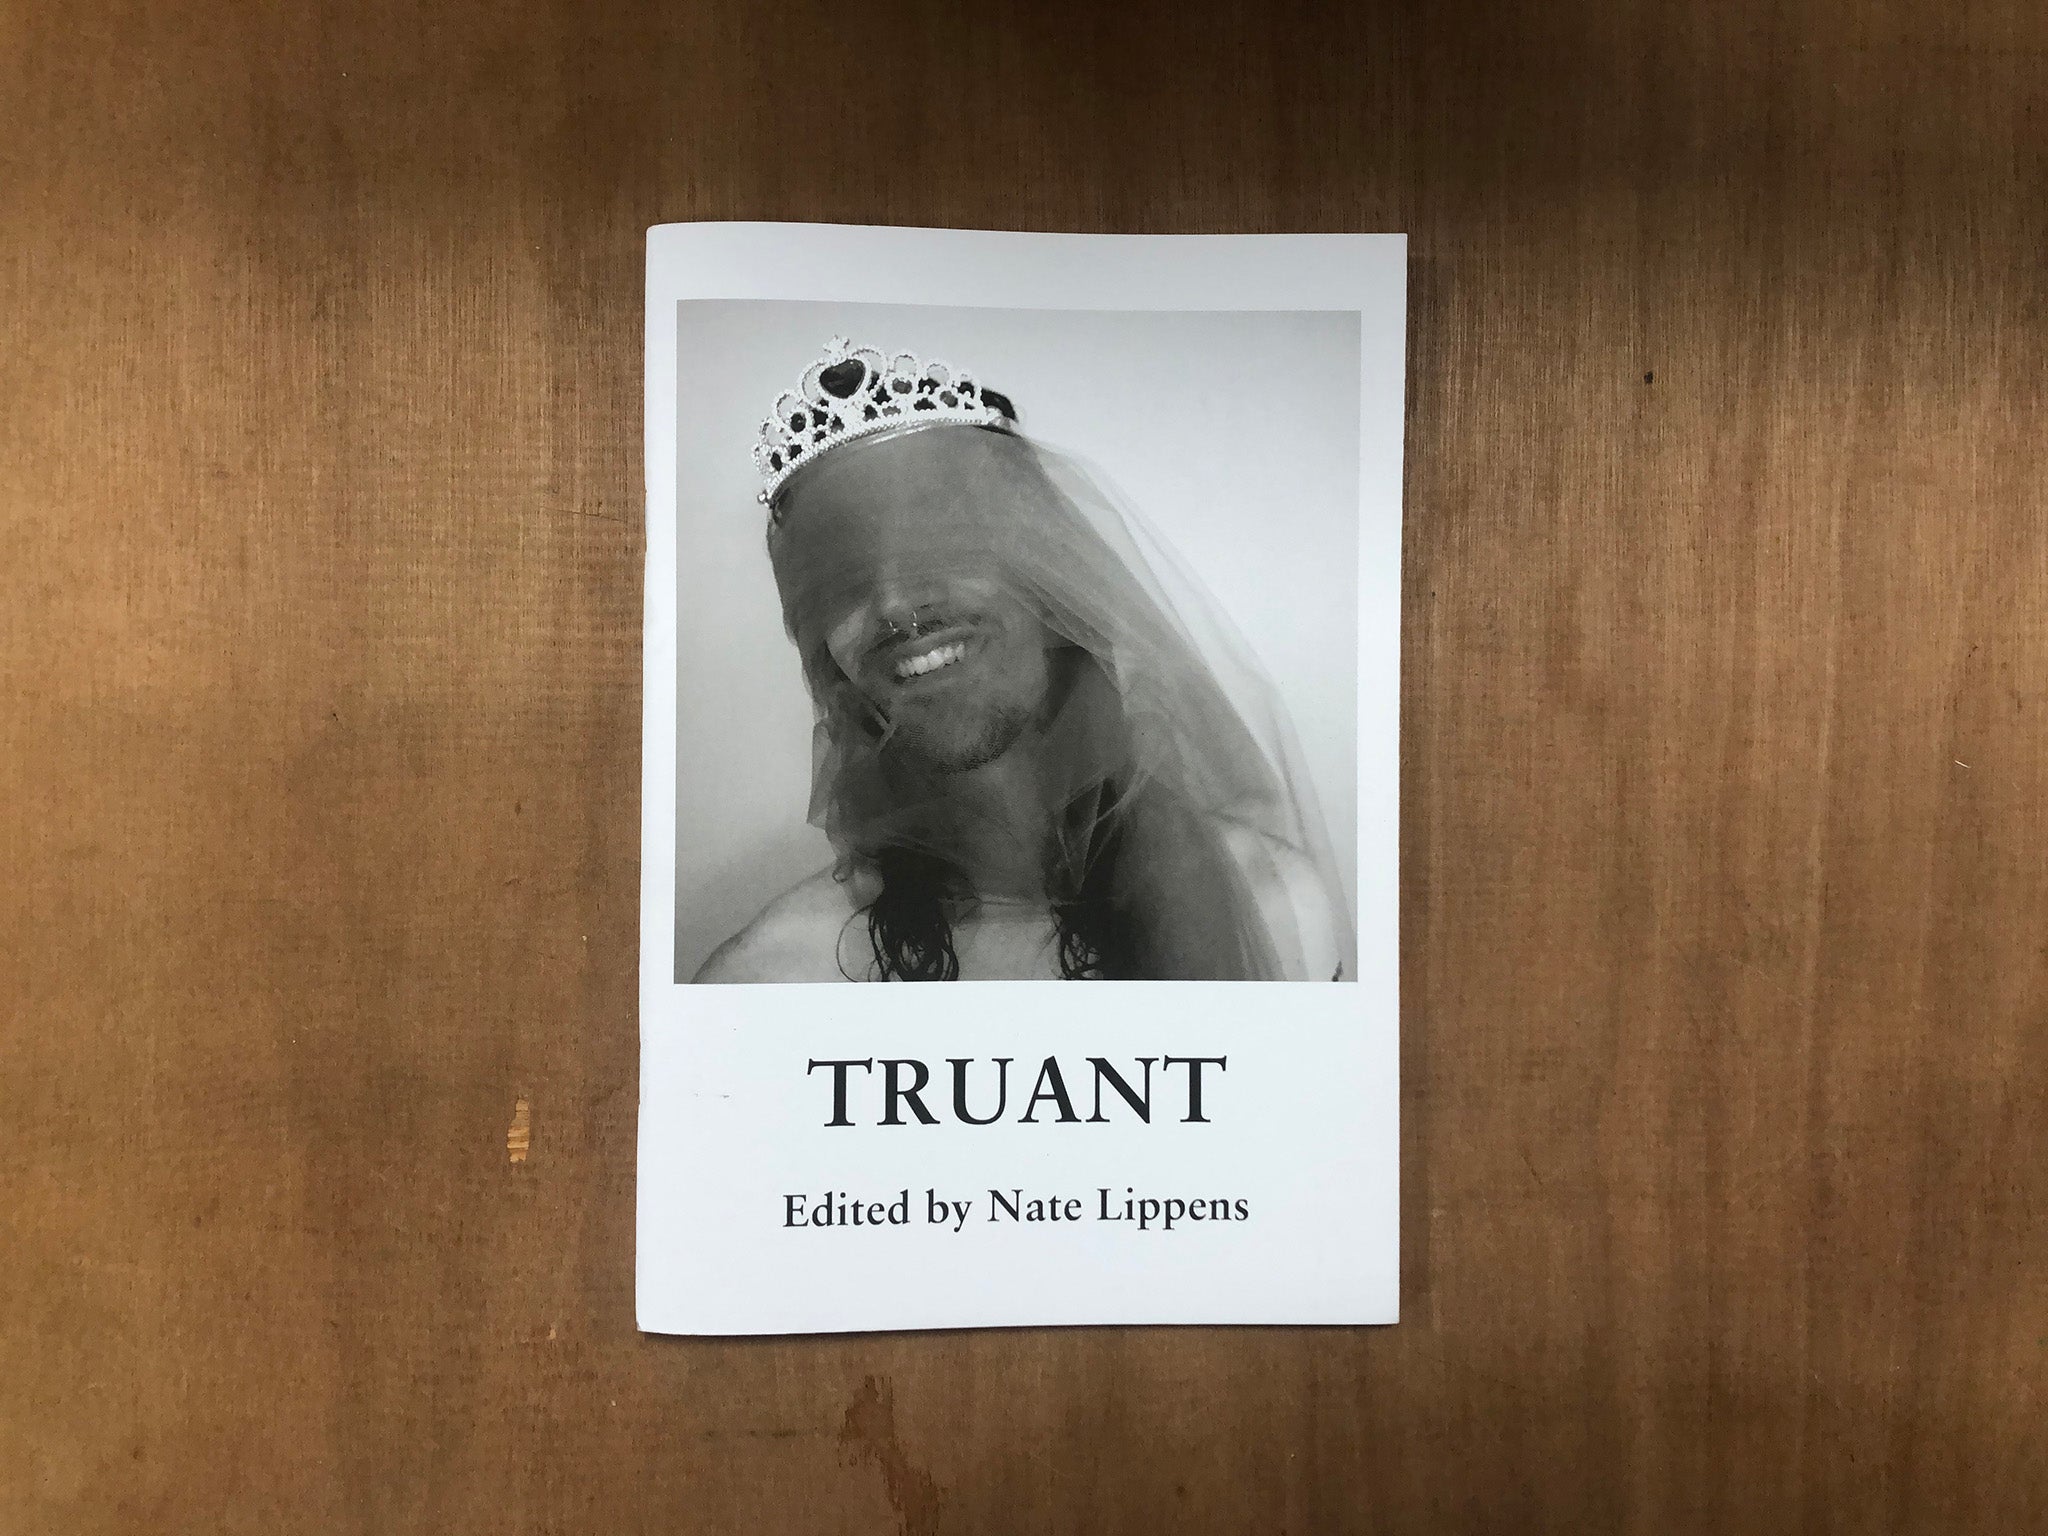 TRUANT Edited by Nate Lippens